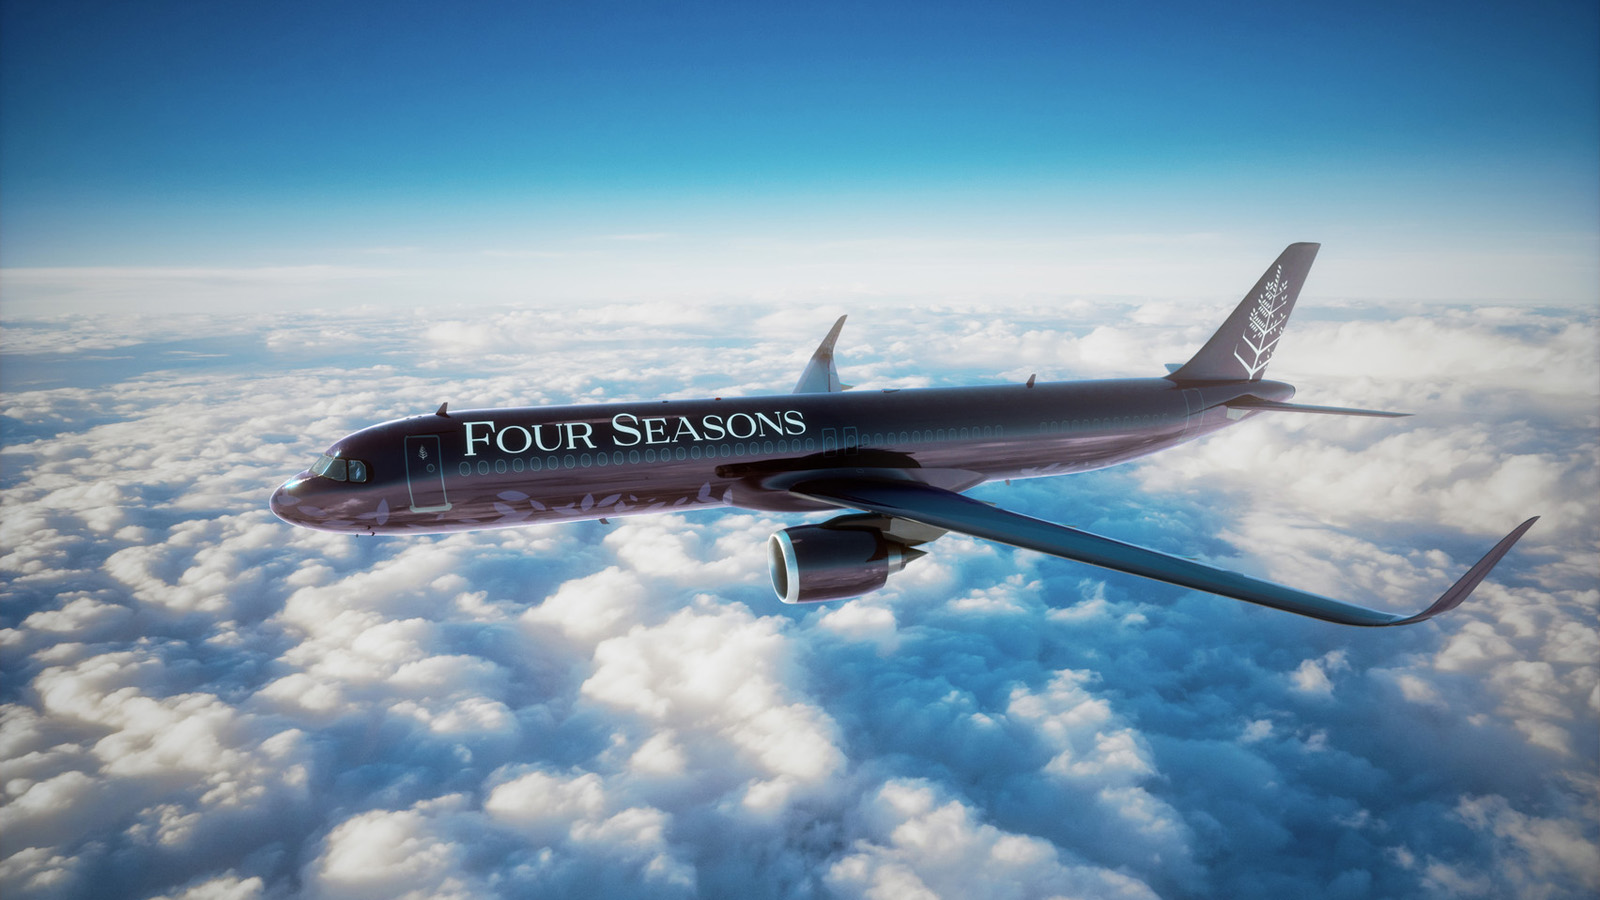 2022 Itineraries Aboard the Four Seasons Private Jet